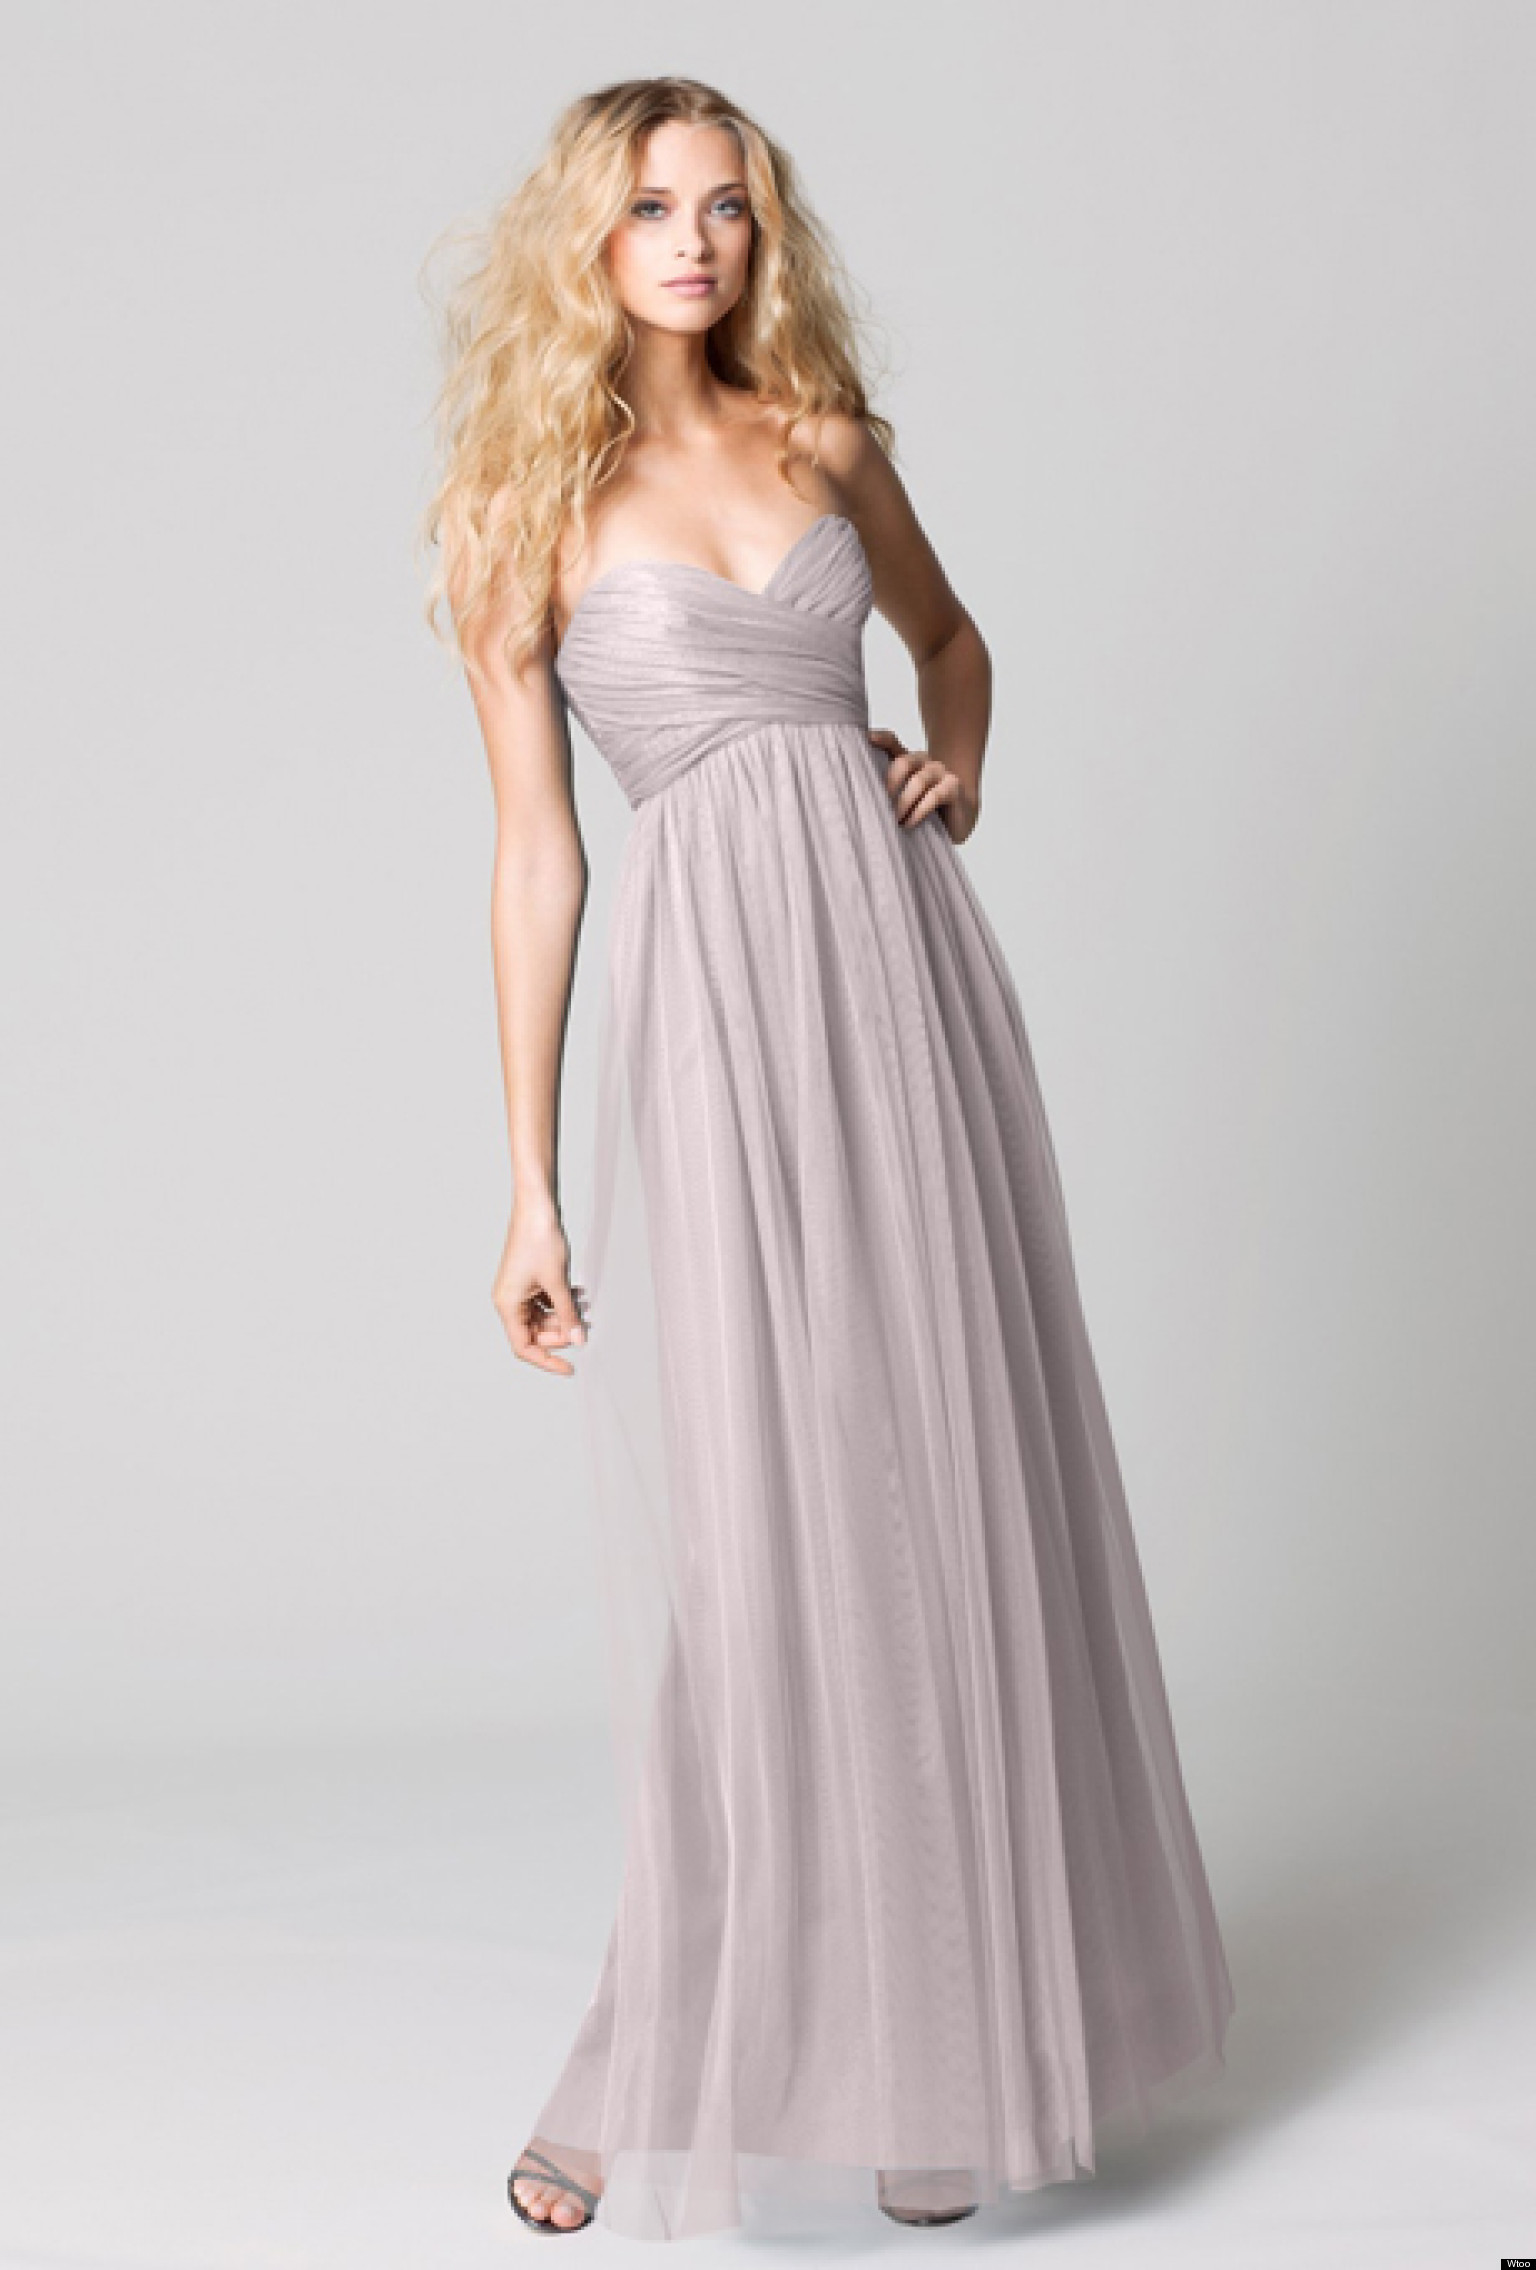 15 Must See Pastel Bridesmaids Dresses Huffpost